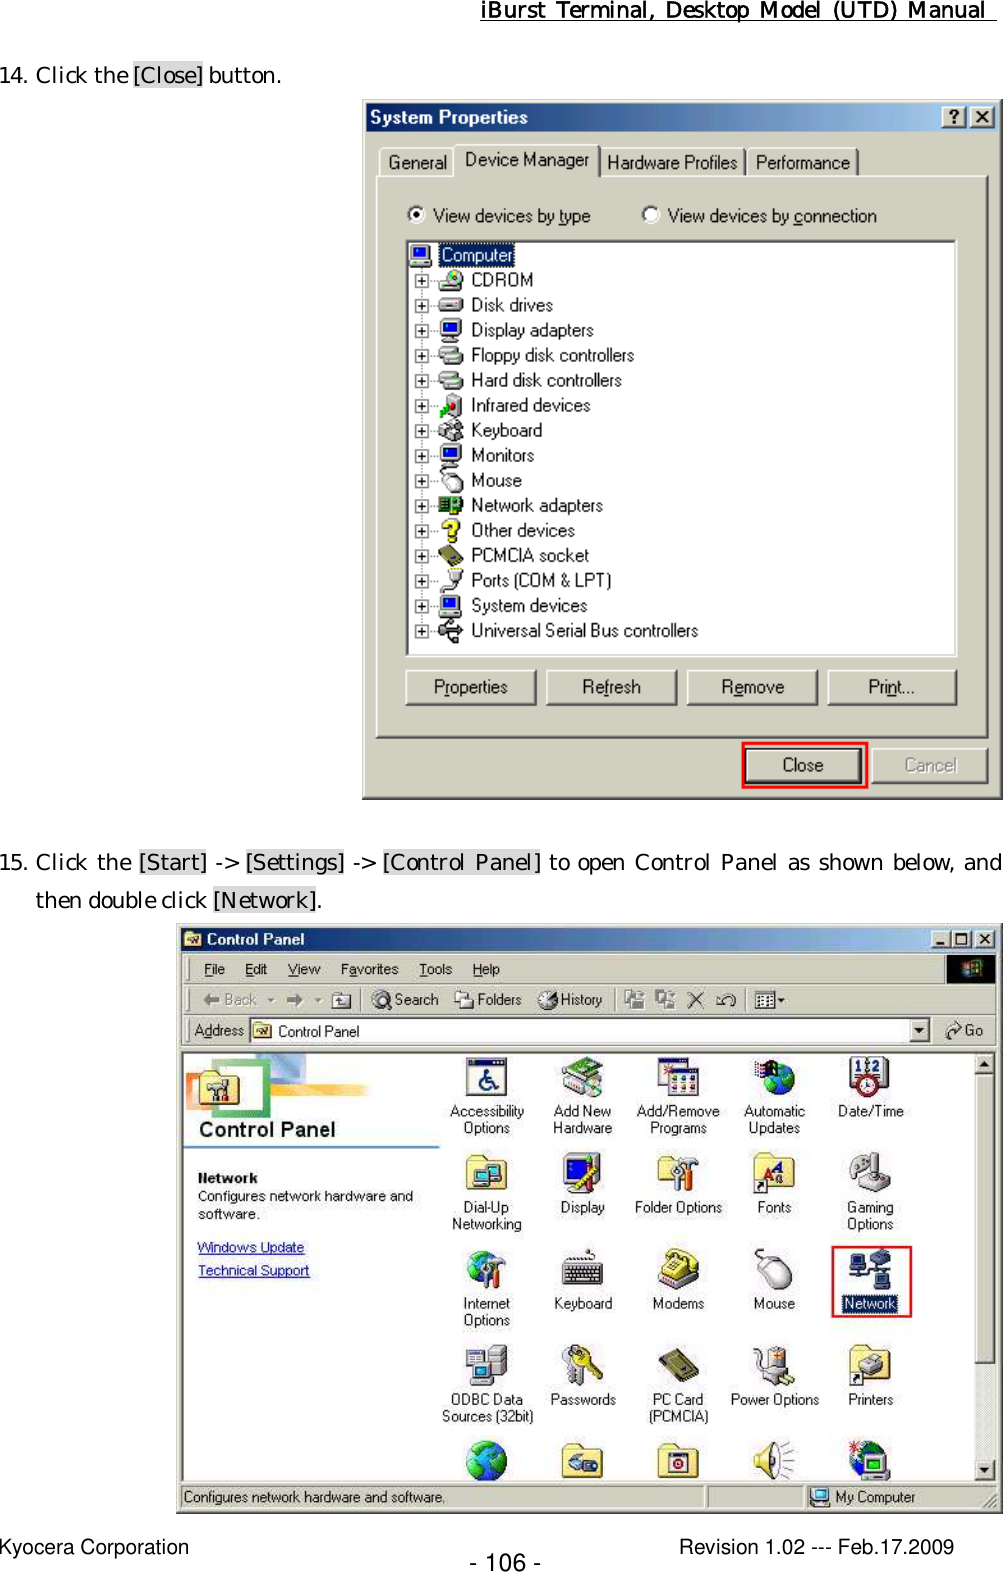 iBurst  Terminal, Desktop  Model  (UTD)  Manual    Kyocera Corporation                                                                                              Revision 1.02 --- Feb.17.2009 - 106 - 14. Click the [Close] button.   15. Click the [Start] -&gt; [Settings] -&gt; [Control Panel] to open Control Panel as shown below, and then double click [Network].  